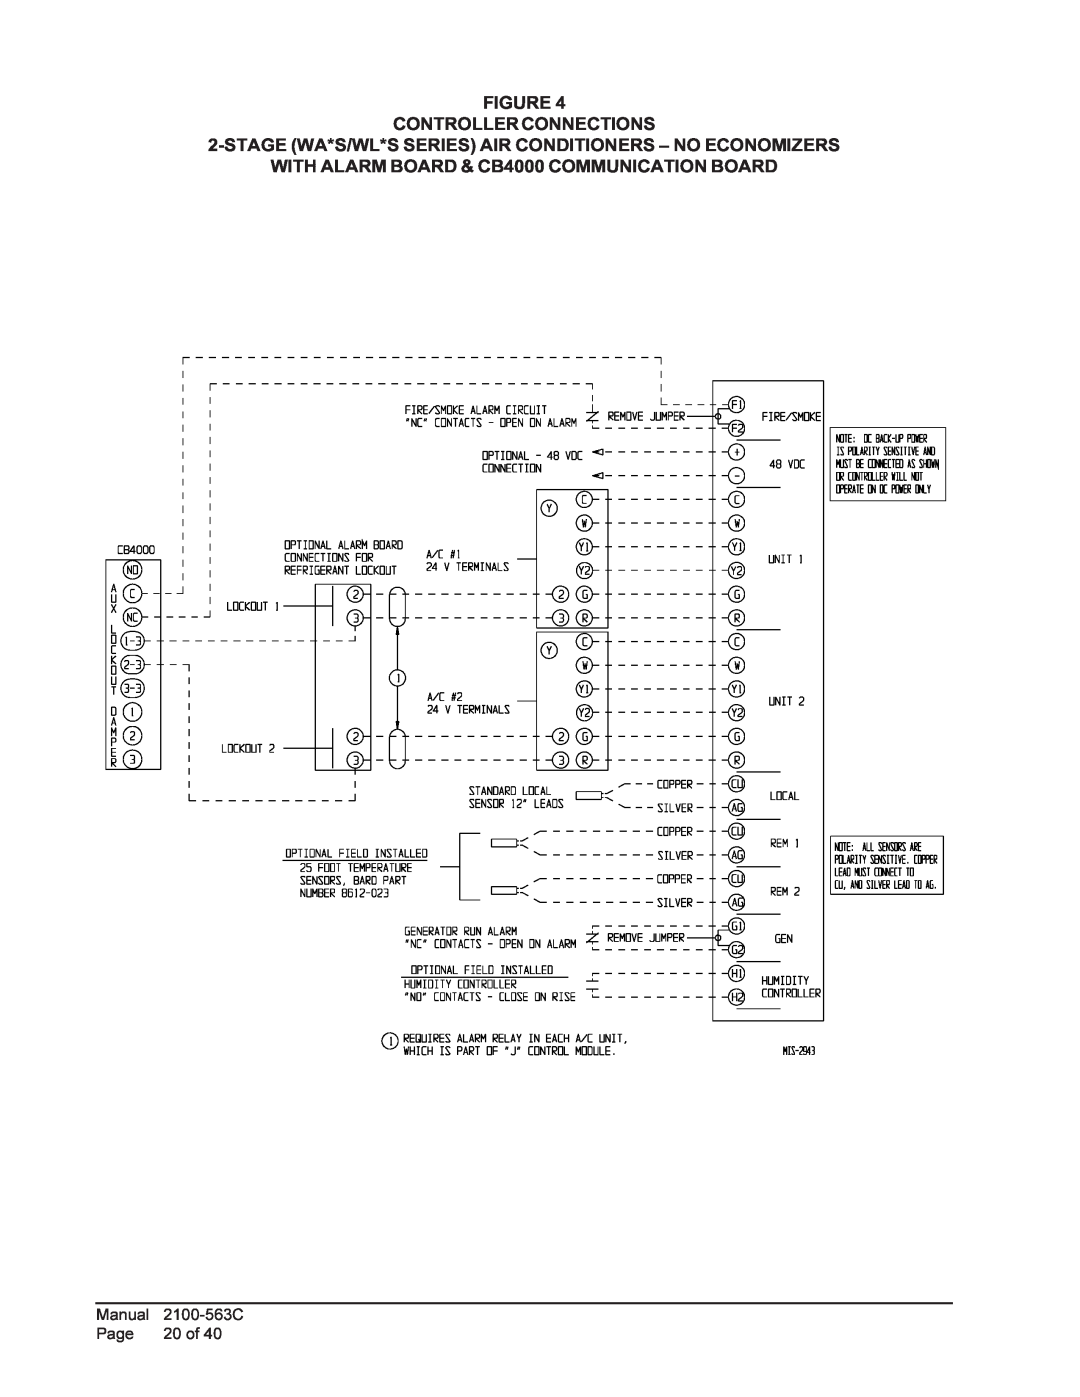 Bard MC4000 Figure Controllerconnections, WITH ALARM BOARD & CB4000 COMMUNICATION BOARD, Manual, Page, 20 of, 2100-563C 